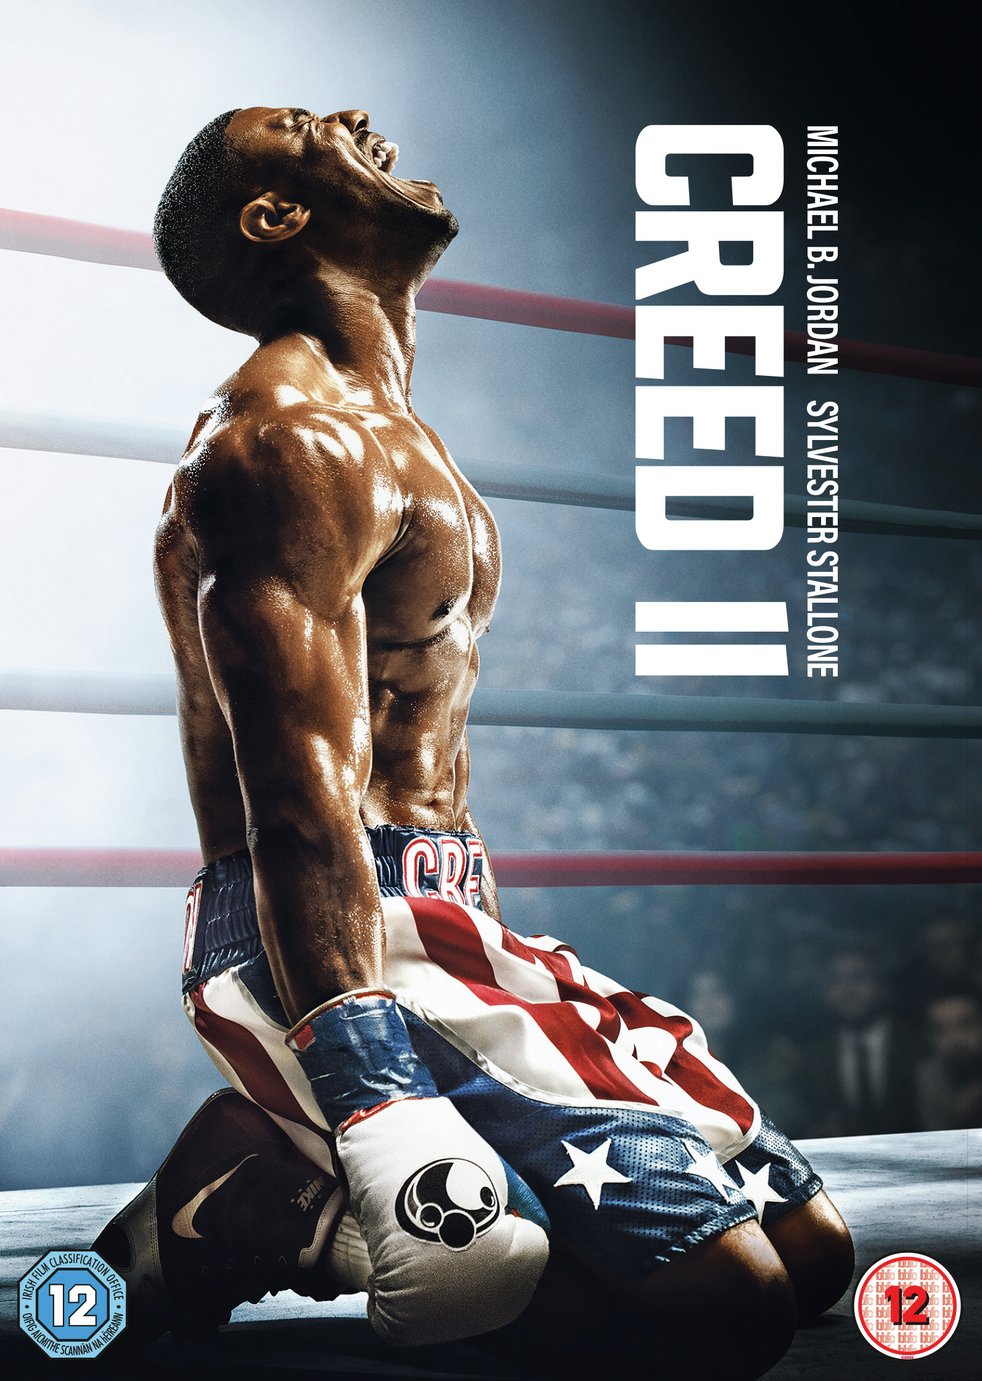 Creed 2 DVD Review